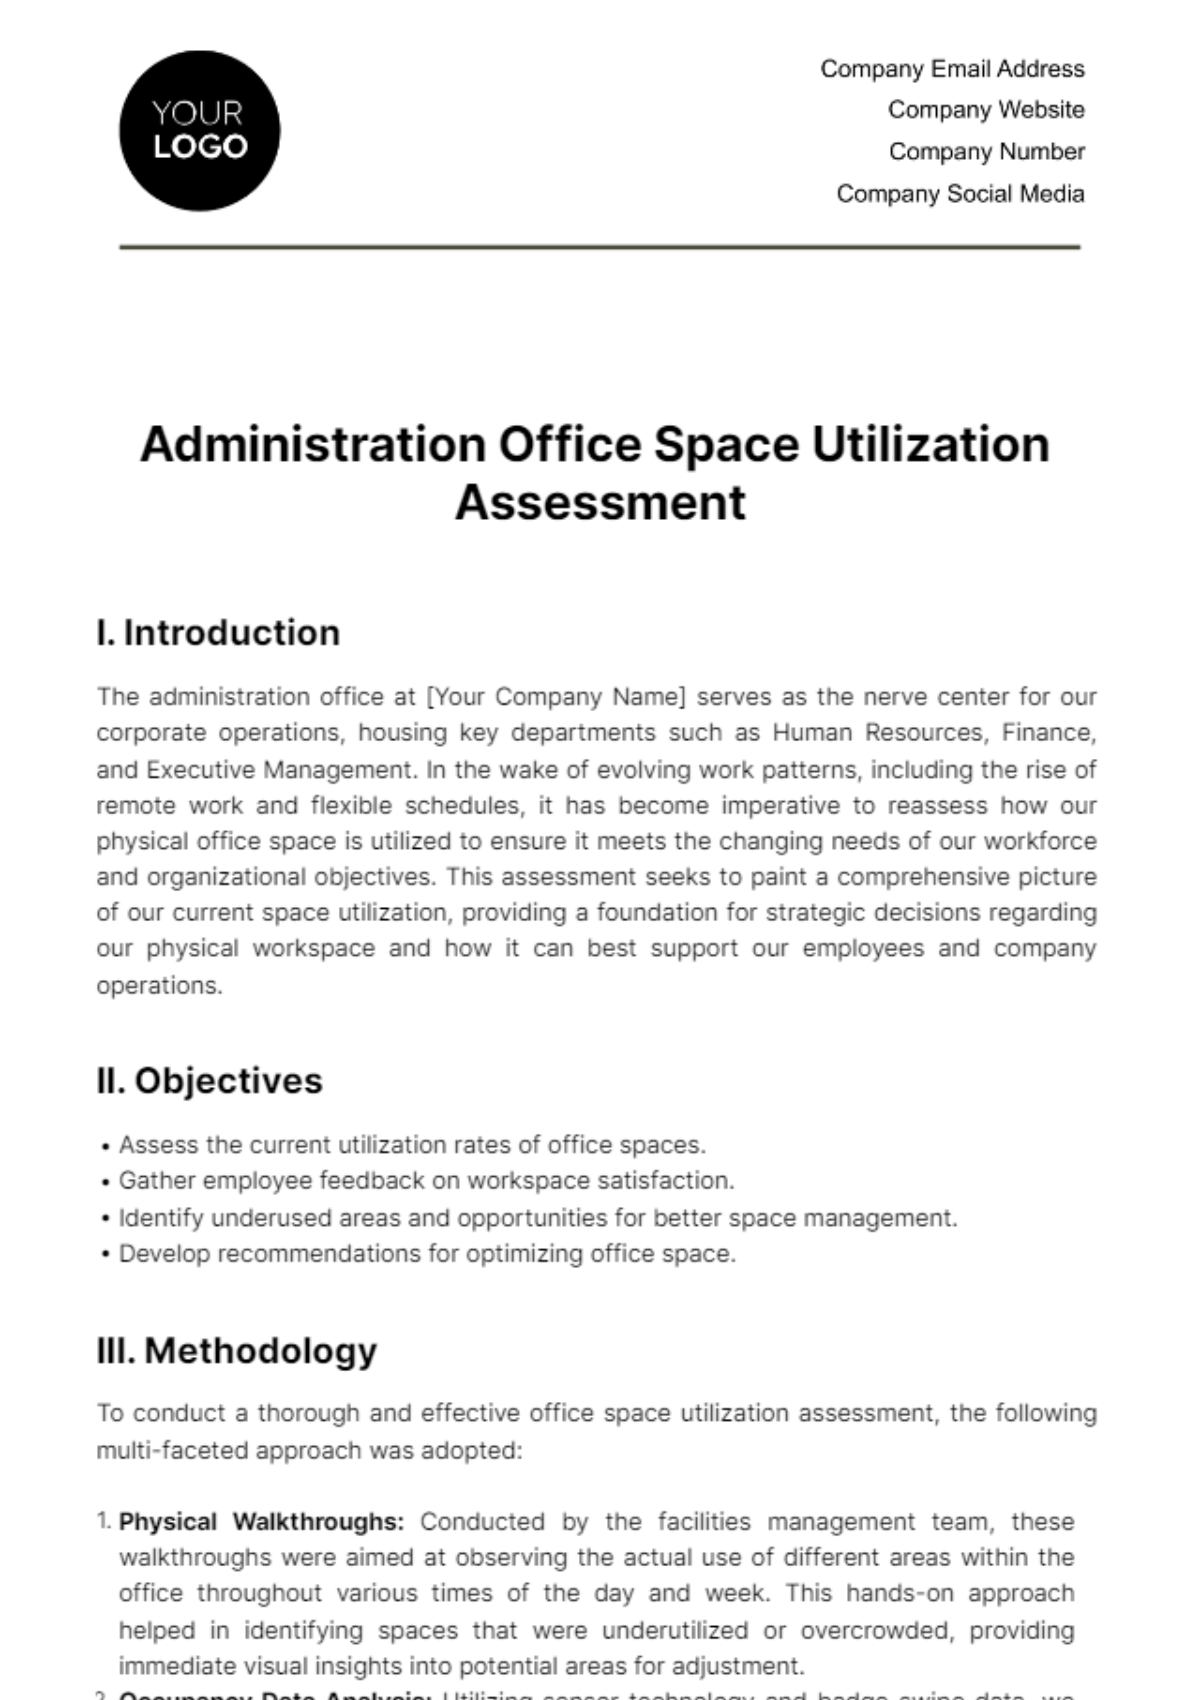 Free Administration Office Space Utilization Assessment Template